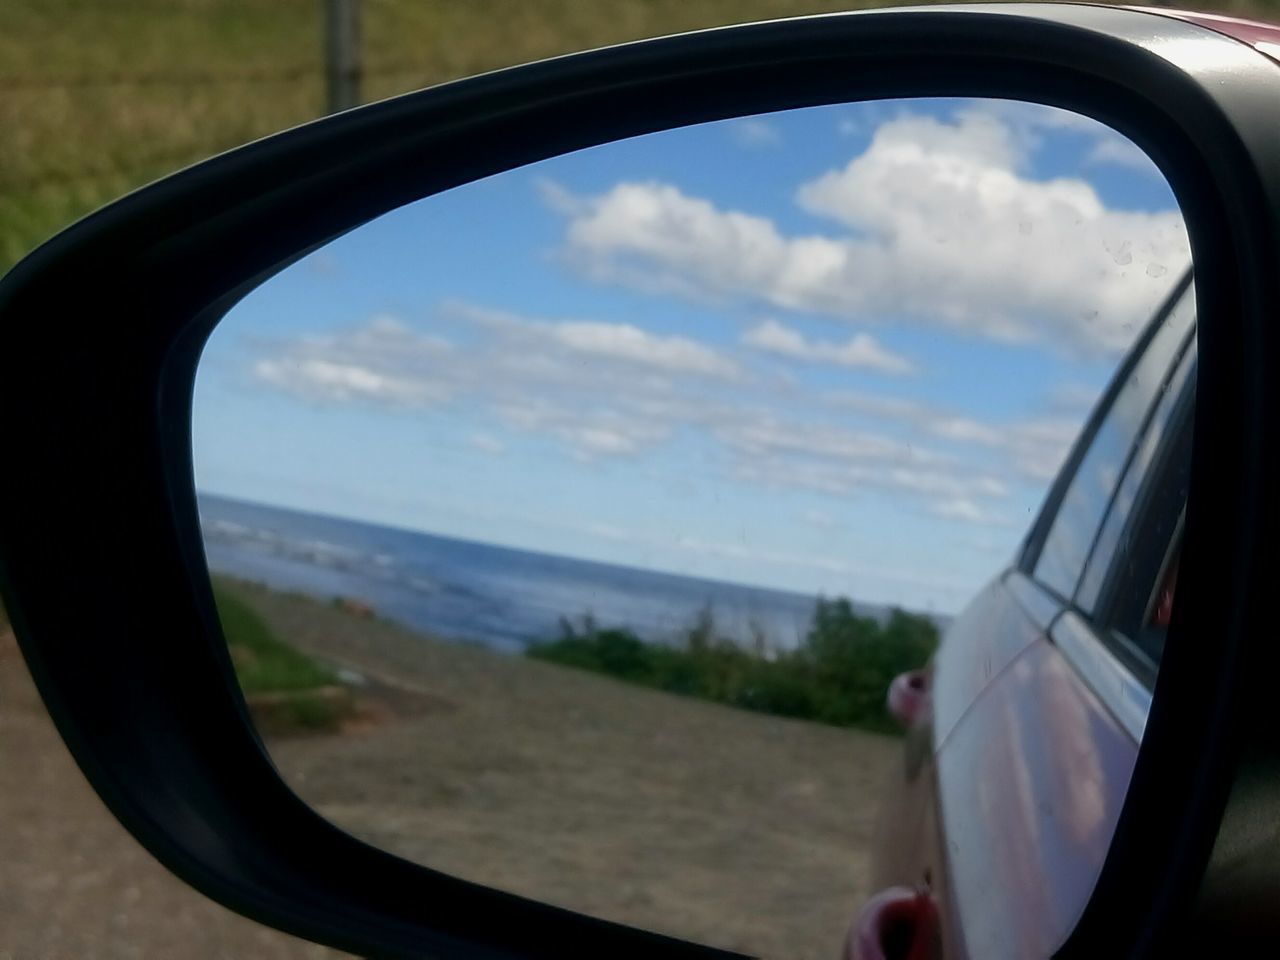 REFLECTION OF SKY SEEN THROUGH SIDE-VIEW MIRROR